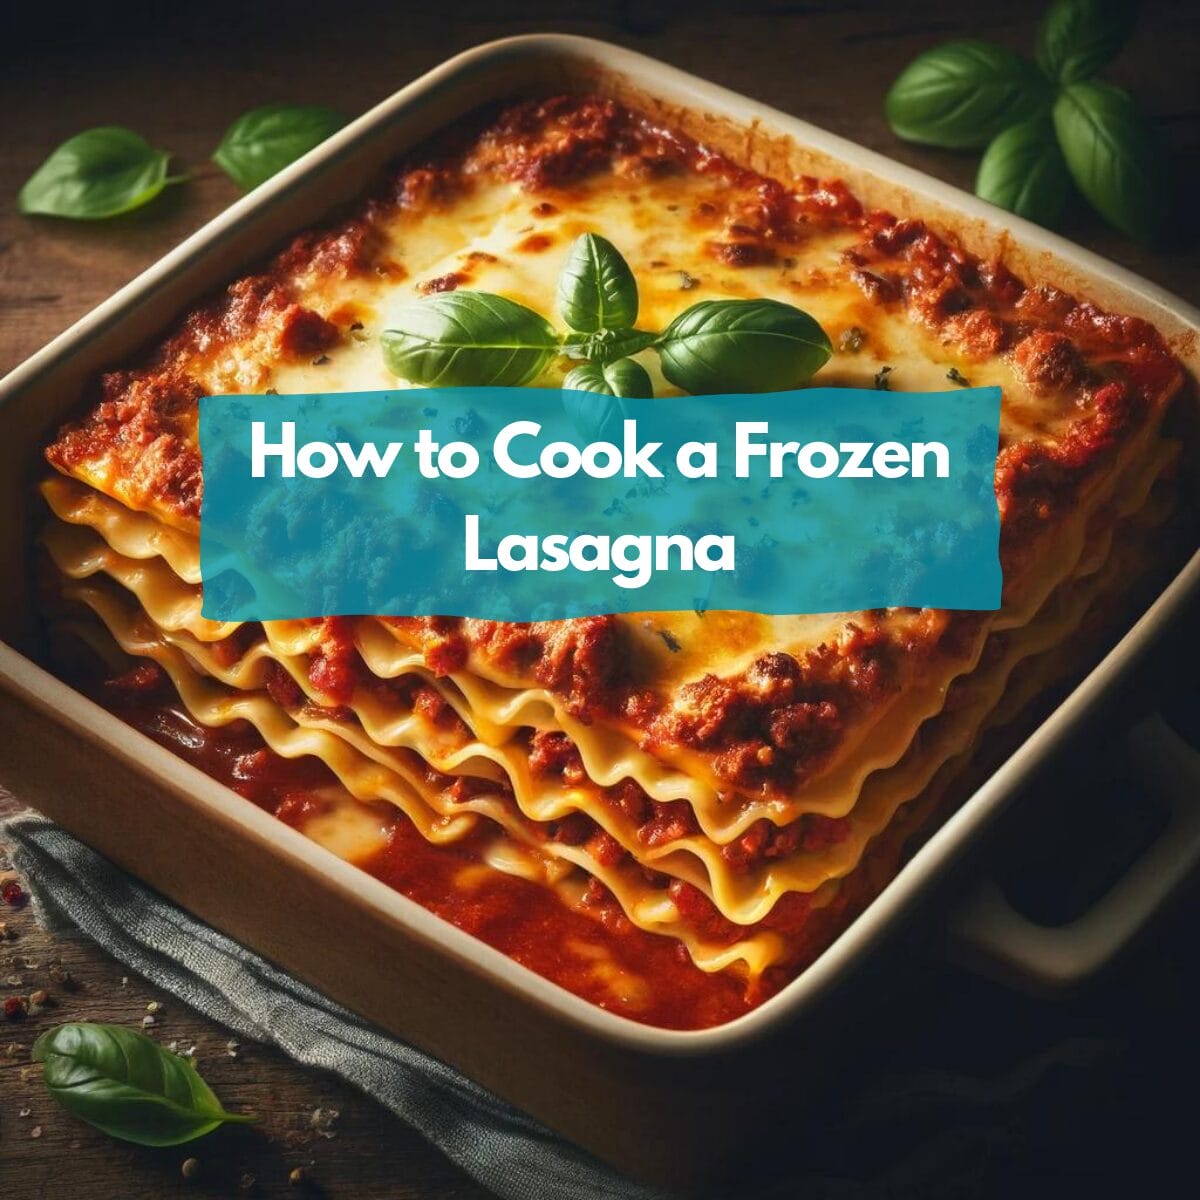 How to Cook a Frozen Lasagna